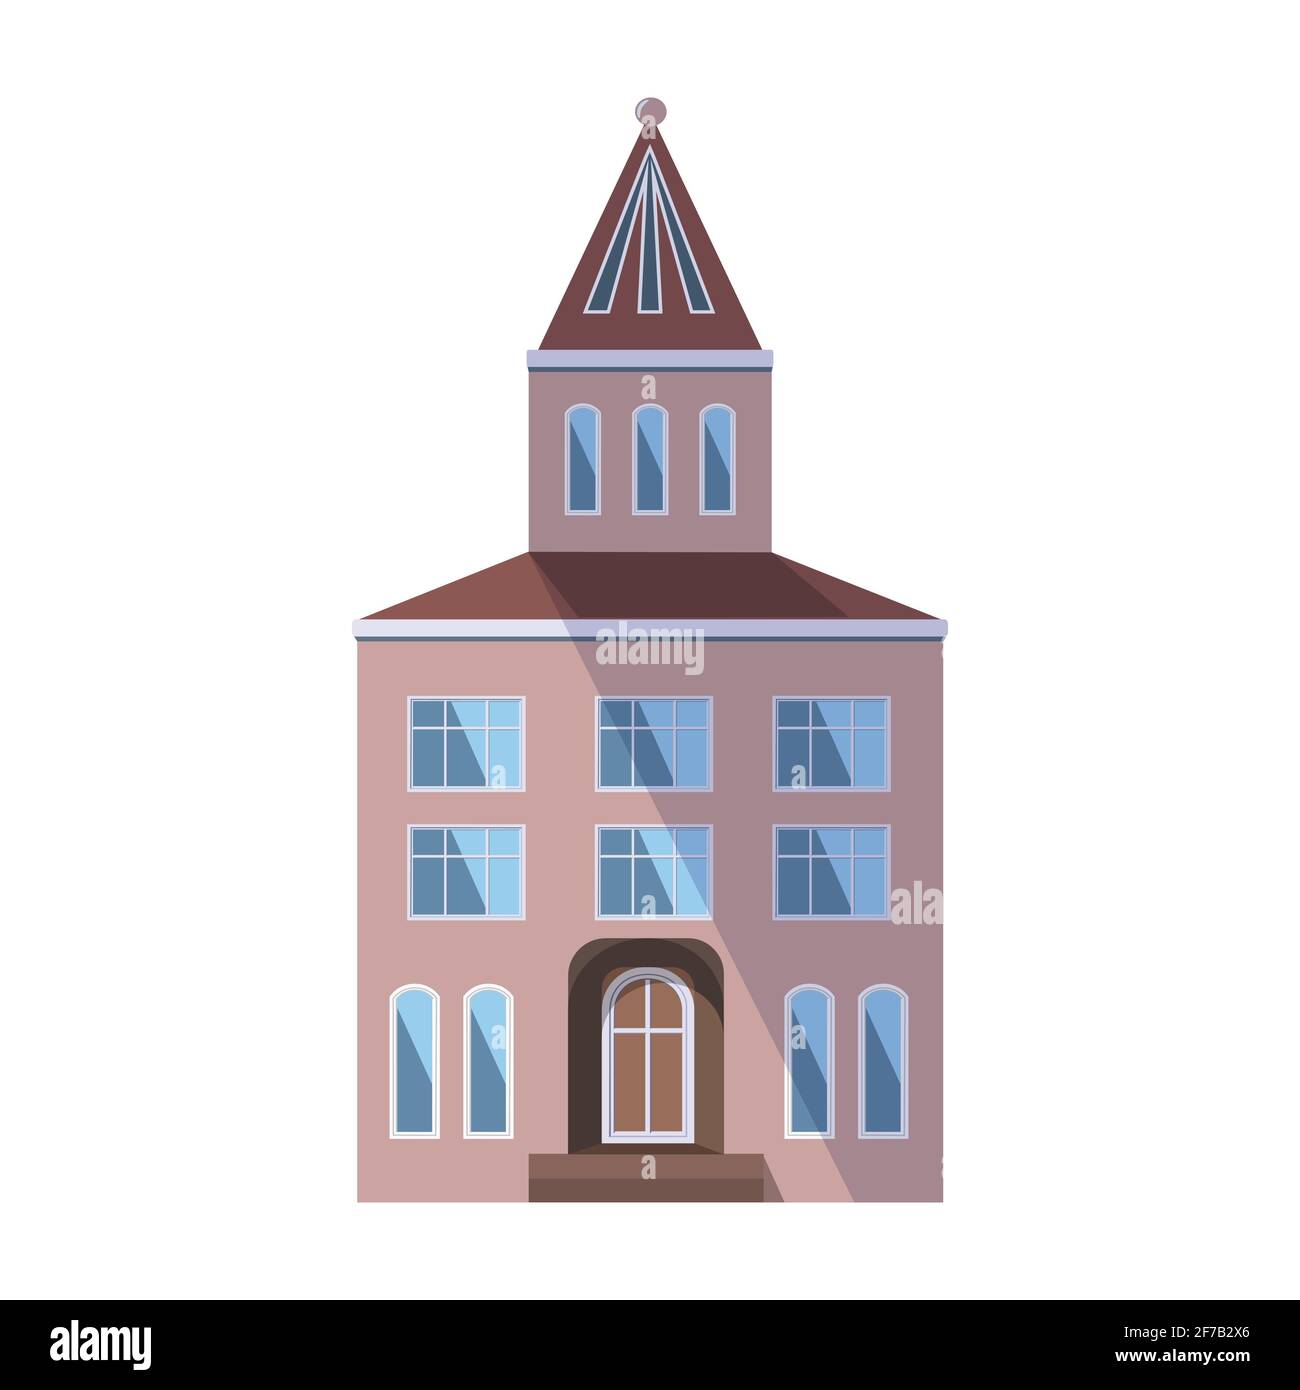 European pink old house in the traditional Dutch town style with a double gable roof, turret, narrow windows and front door. Vector illustration in Stock Vector